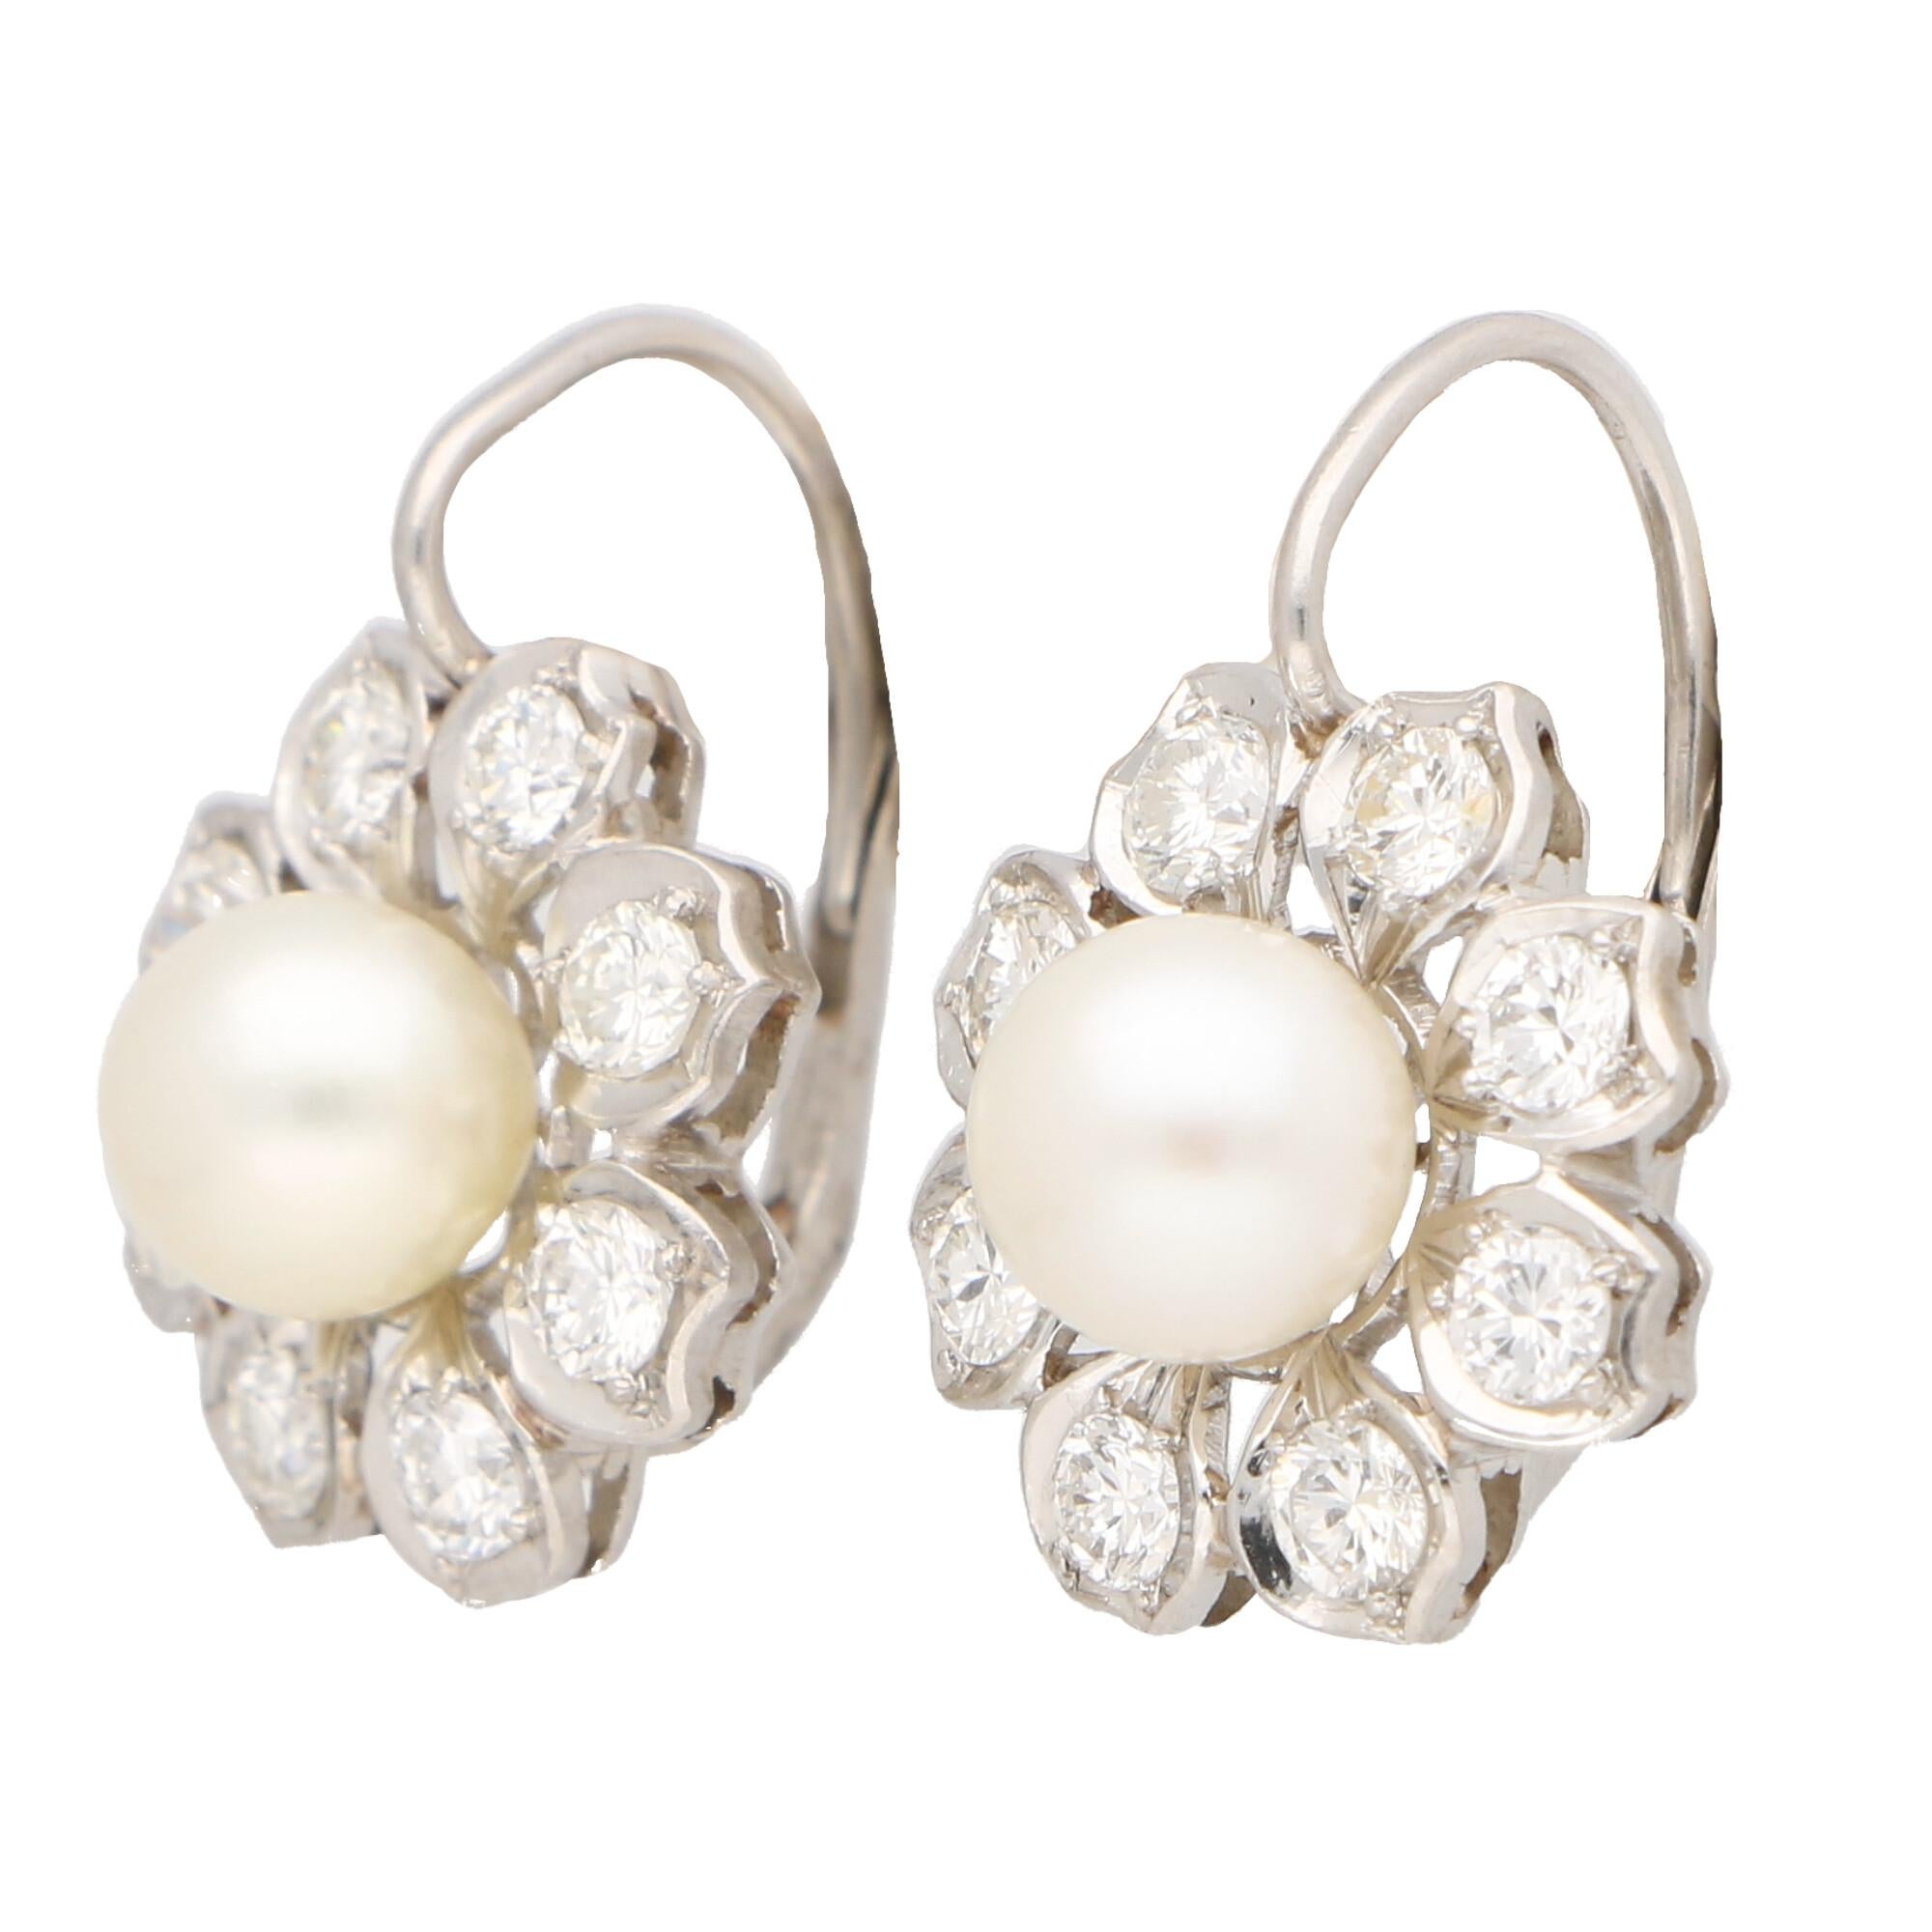 A beautiful pair of vintage Akoya pearl and diamond cluster floral drop earrings set in platinum.

Each earring is centrally set with a lovely 7 millimetre cream coloured Akoya pearl. This pearl is set within a beautiful platinum floral framework